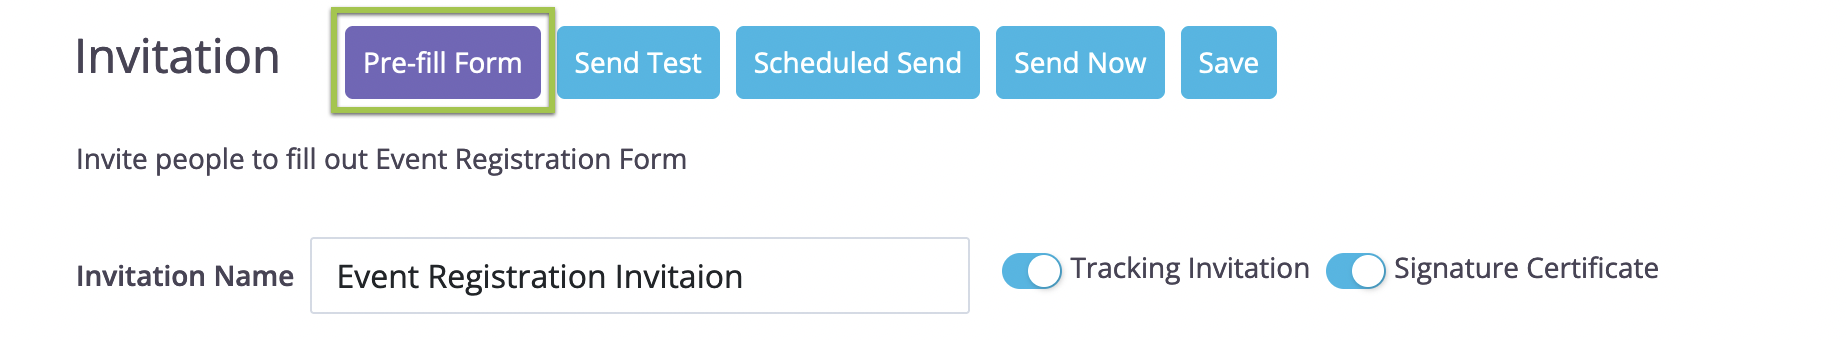 pre-filled form button